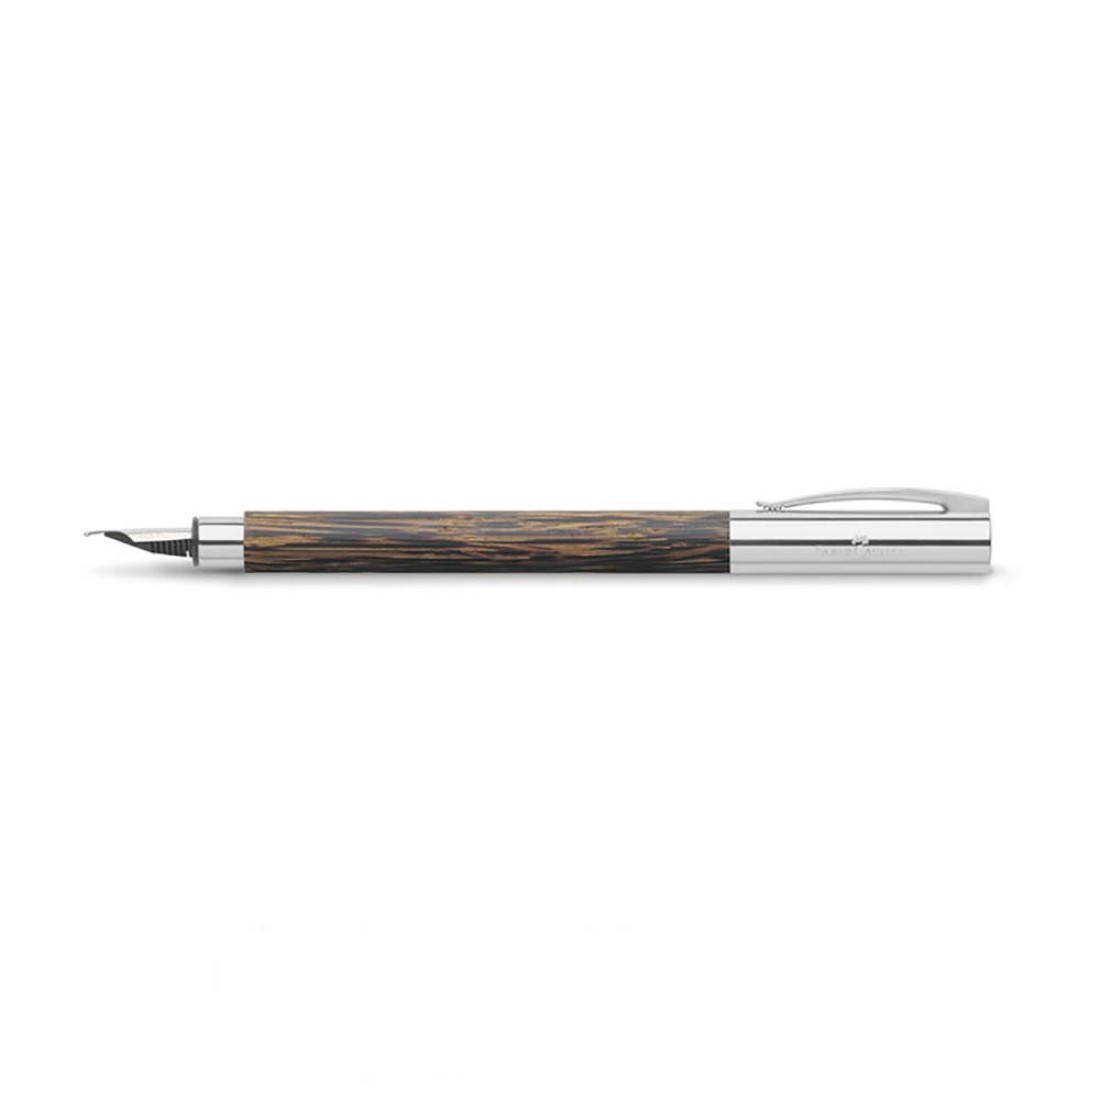 Faber-Castell Ambition Coconut Fountain pen